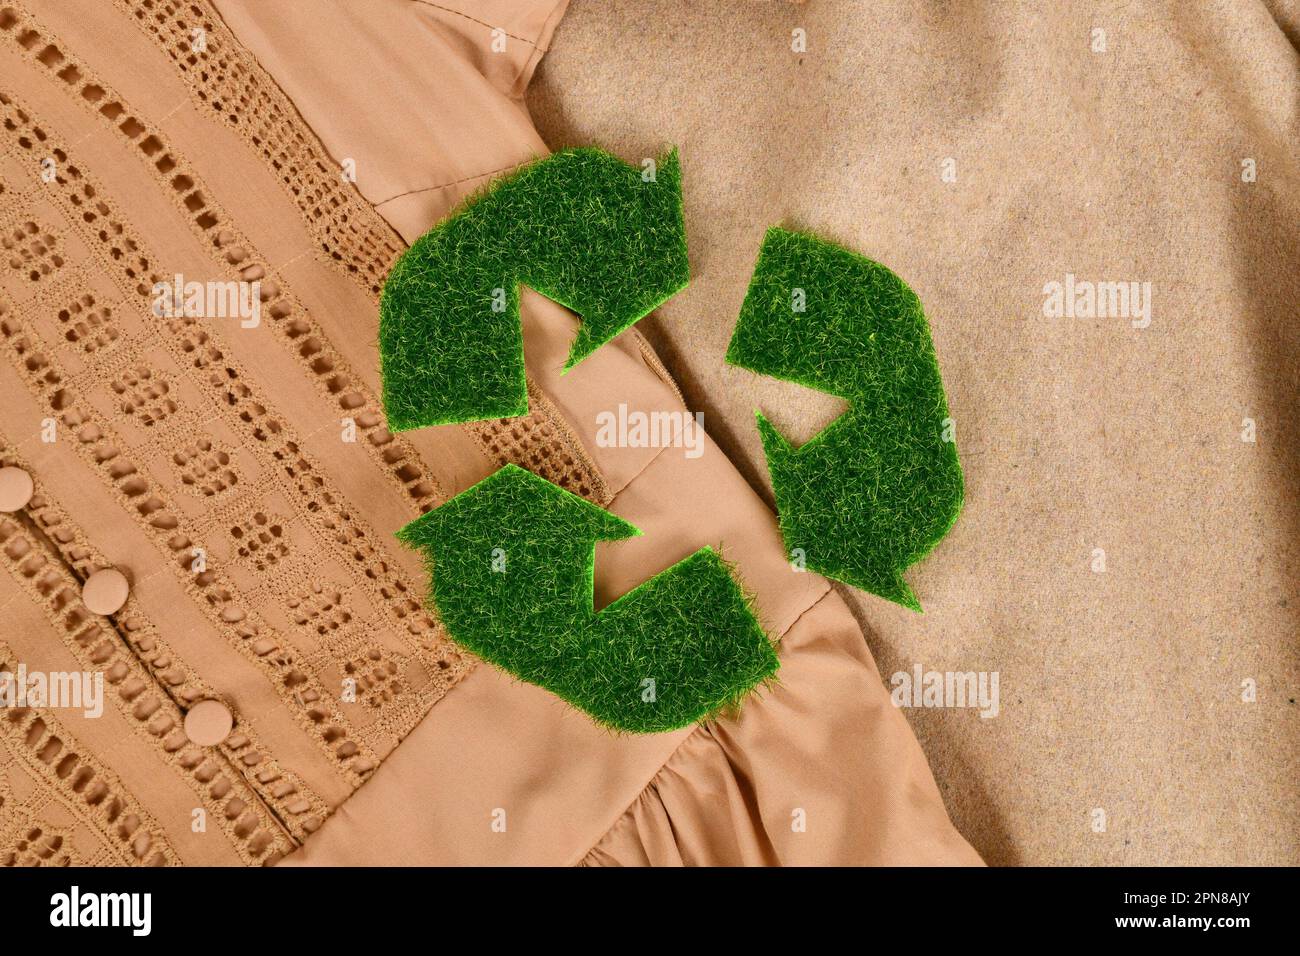 Concept for environmental friendly produced clothing with recycling arrow symbol made out of grass Stock Photo